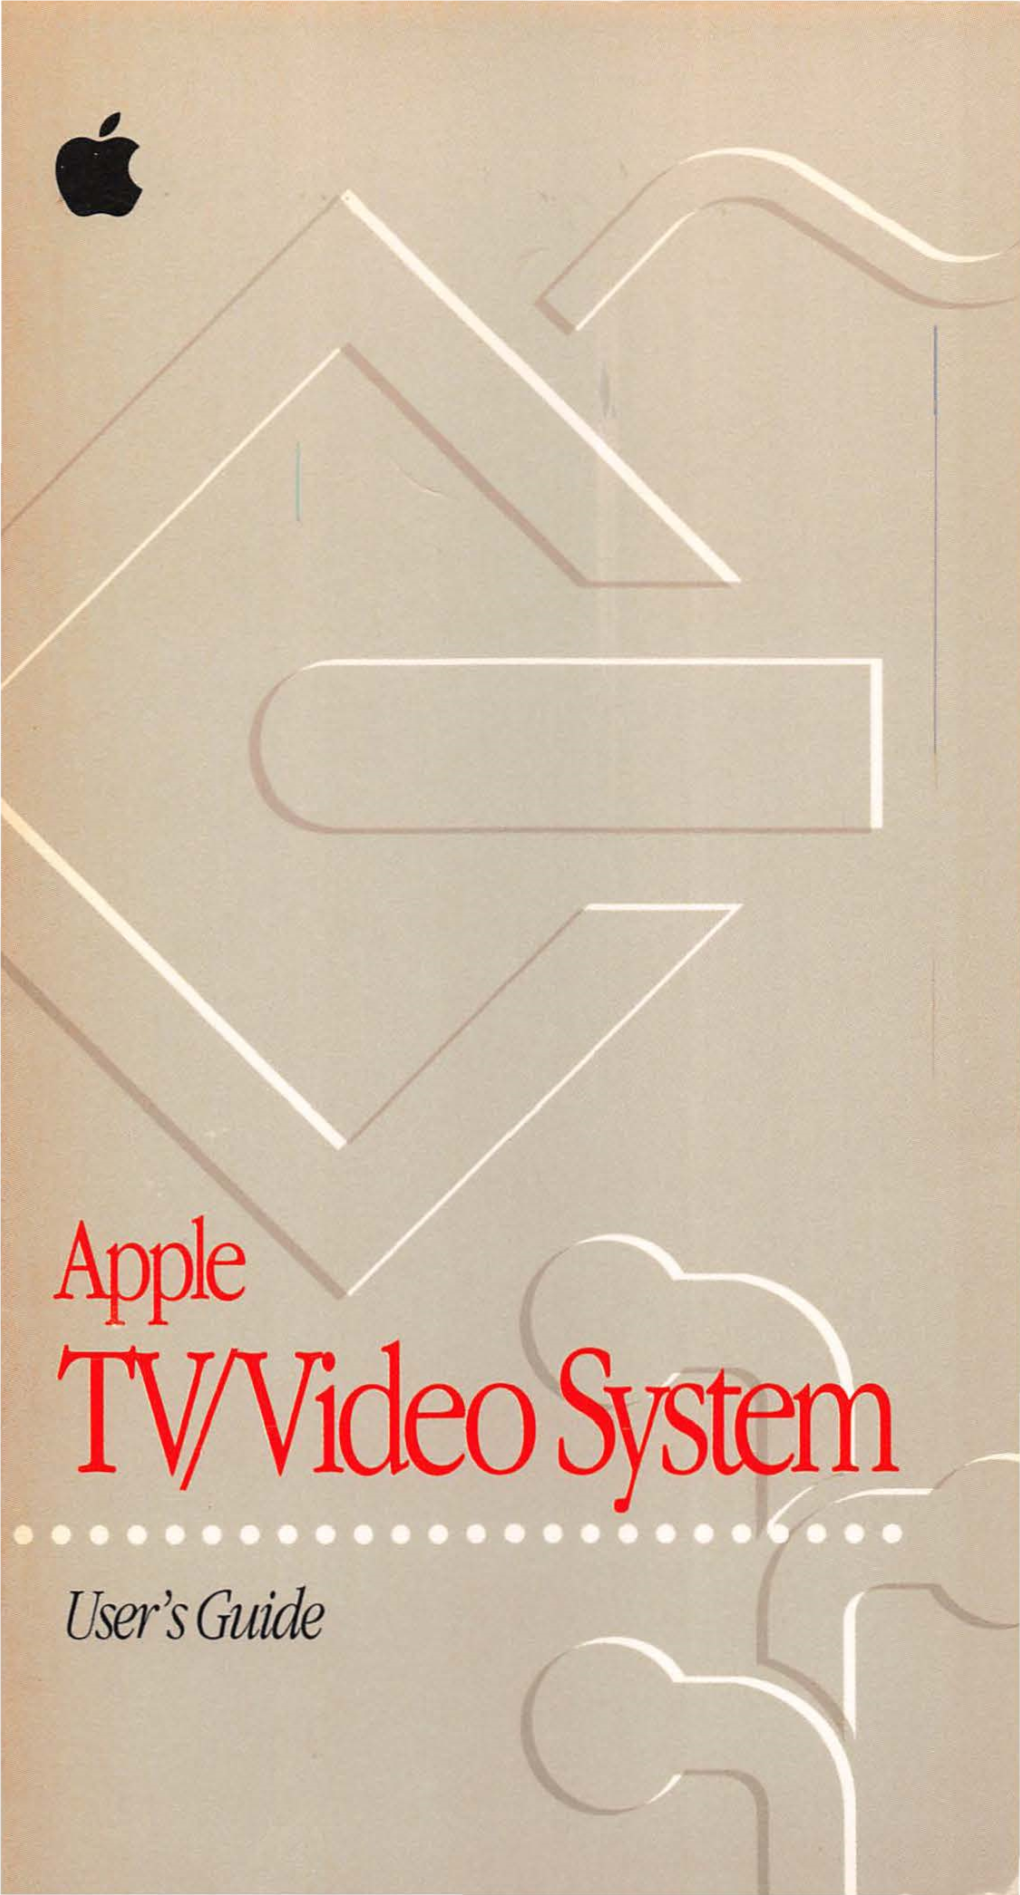 Apple TV Video System Users Guide 1995.Pdf